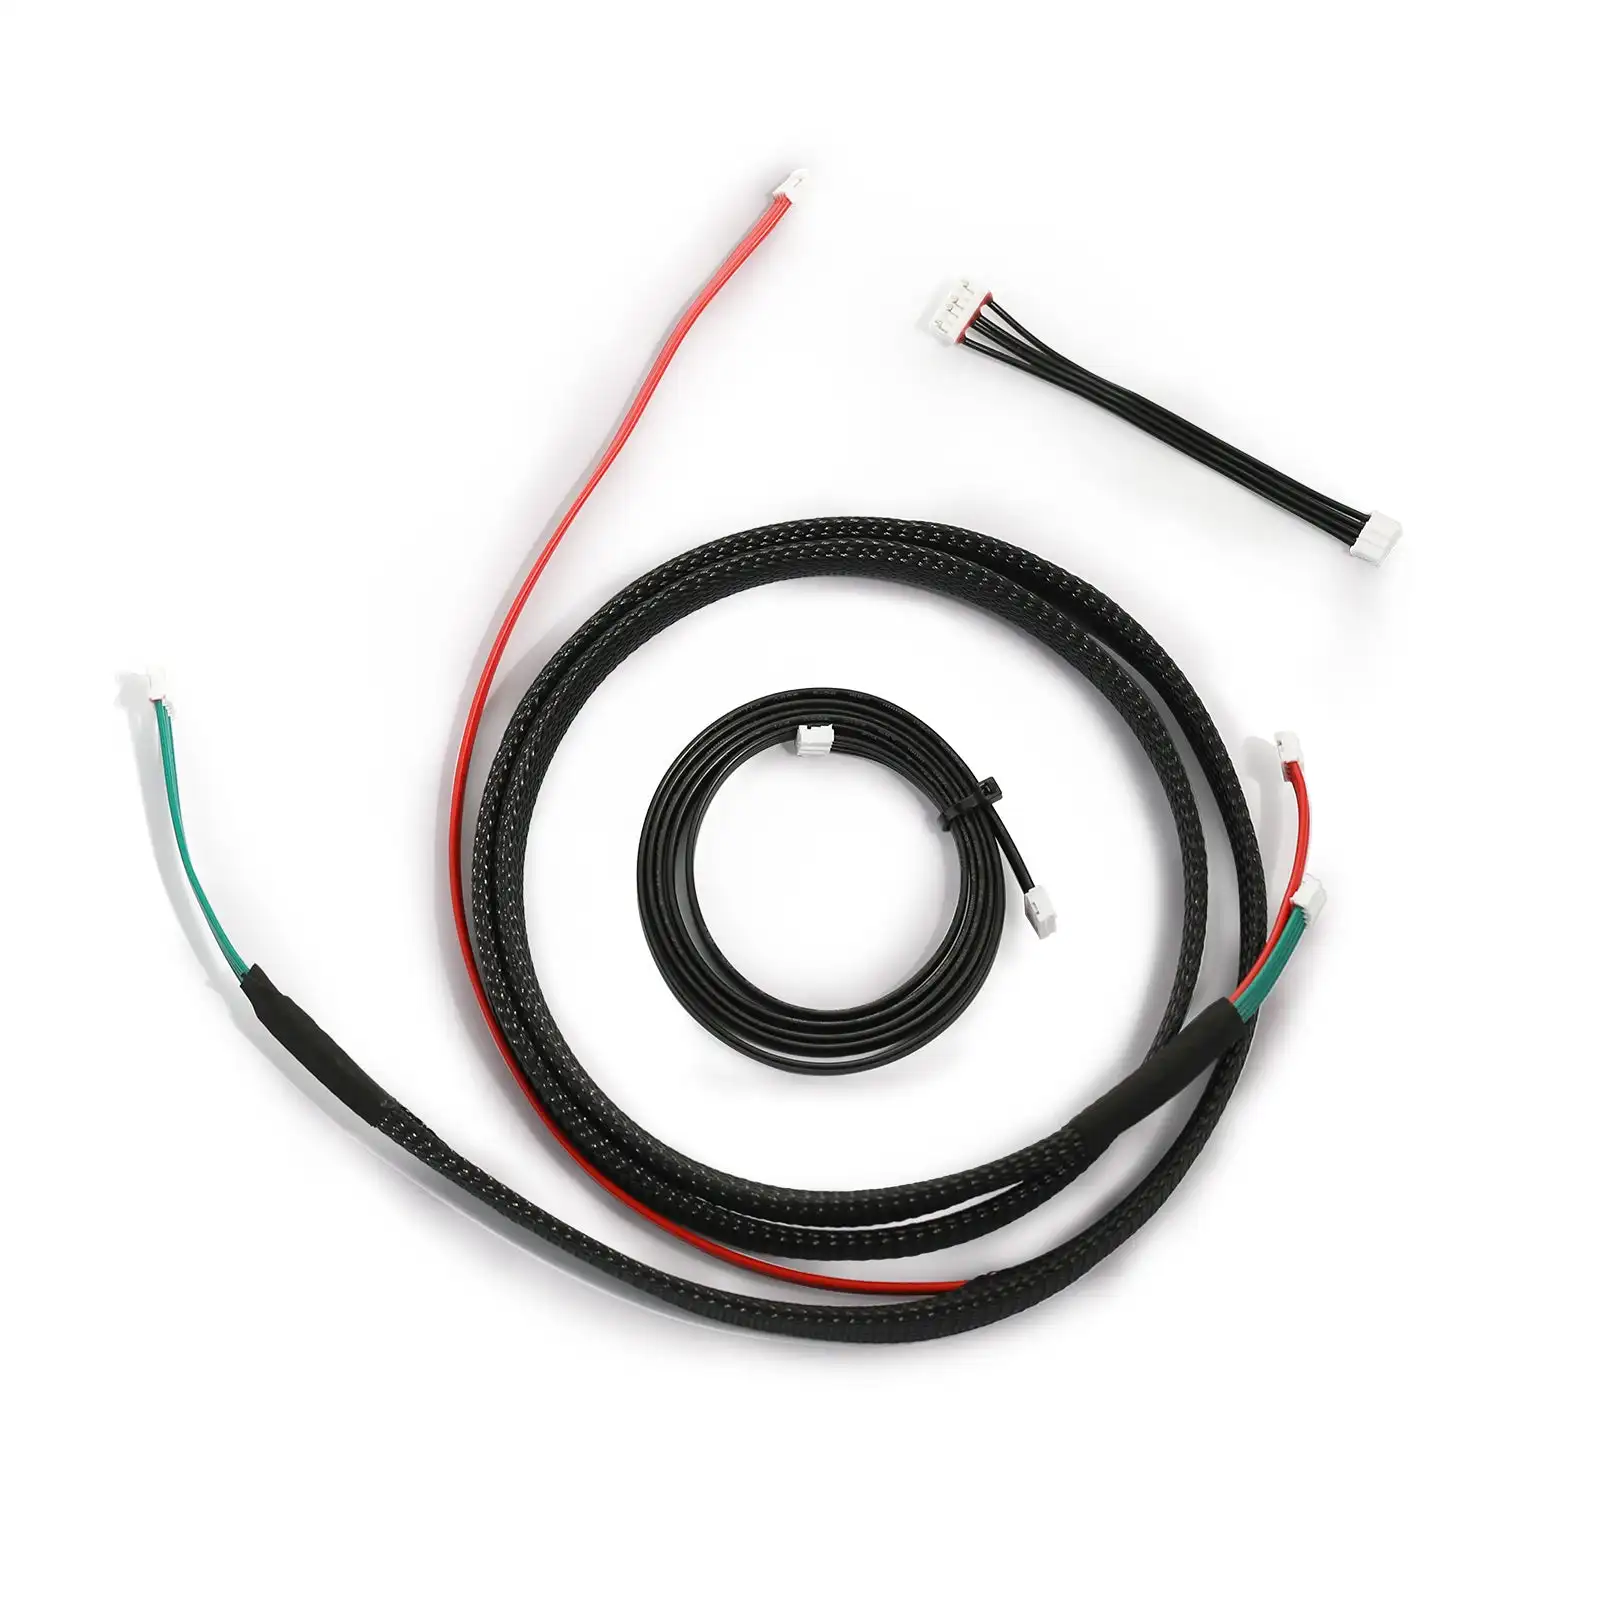 

NEJE MAX WIRE HARNESS, POWER CORD, DATA CORD FOR NEJE 3 MAX , NEJE 2S MAX LASER ENGRAVER